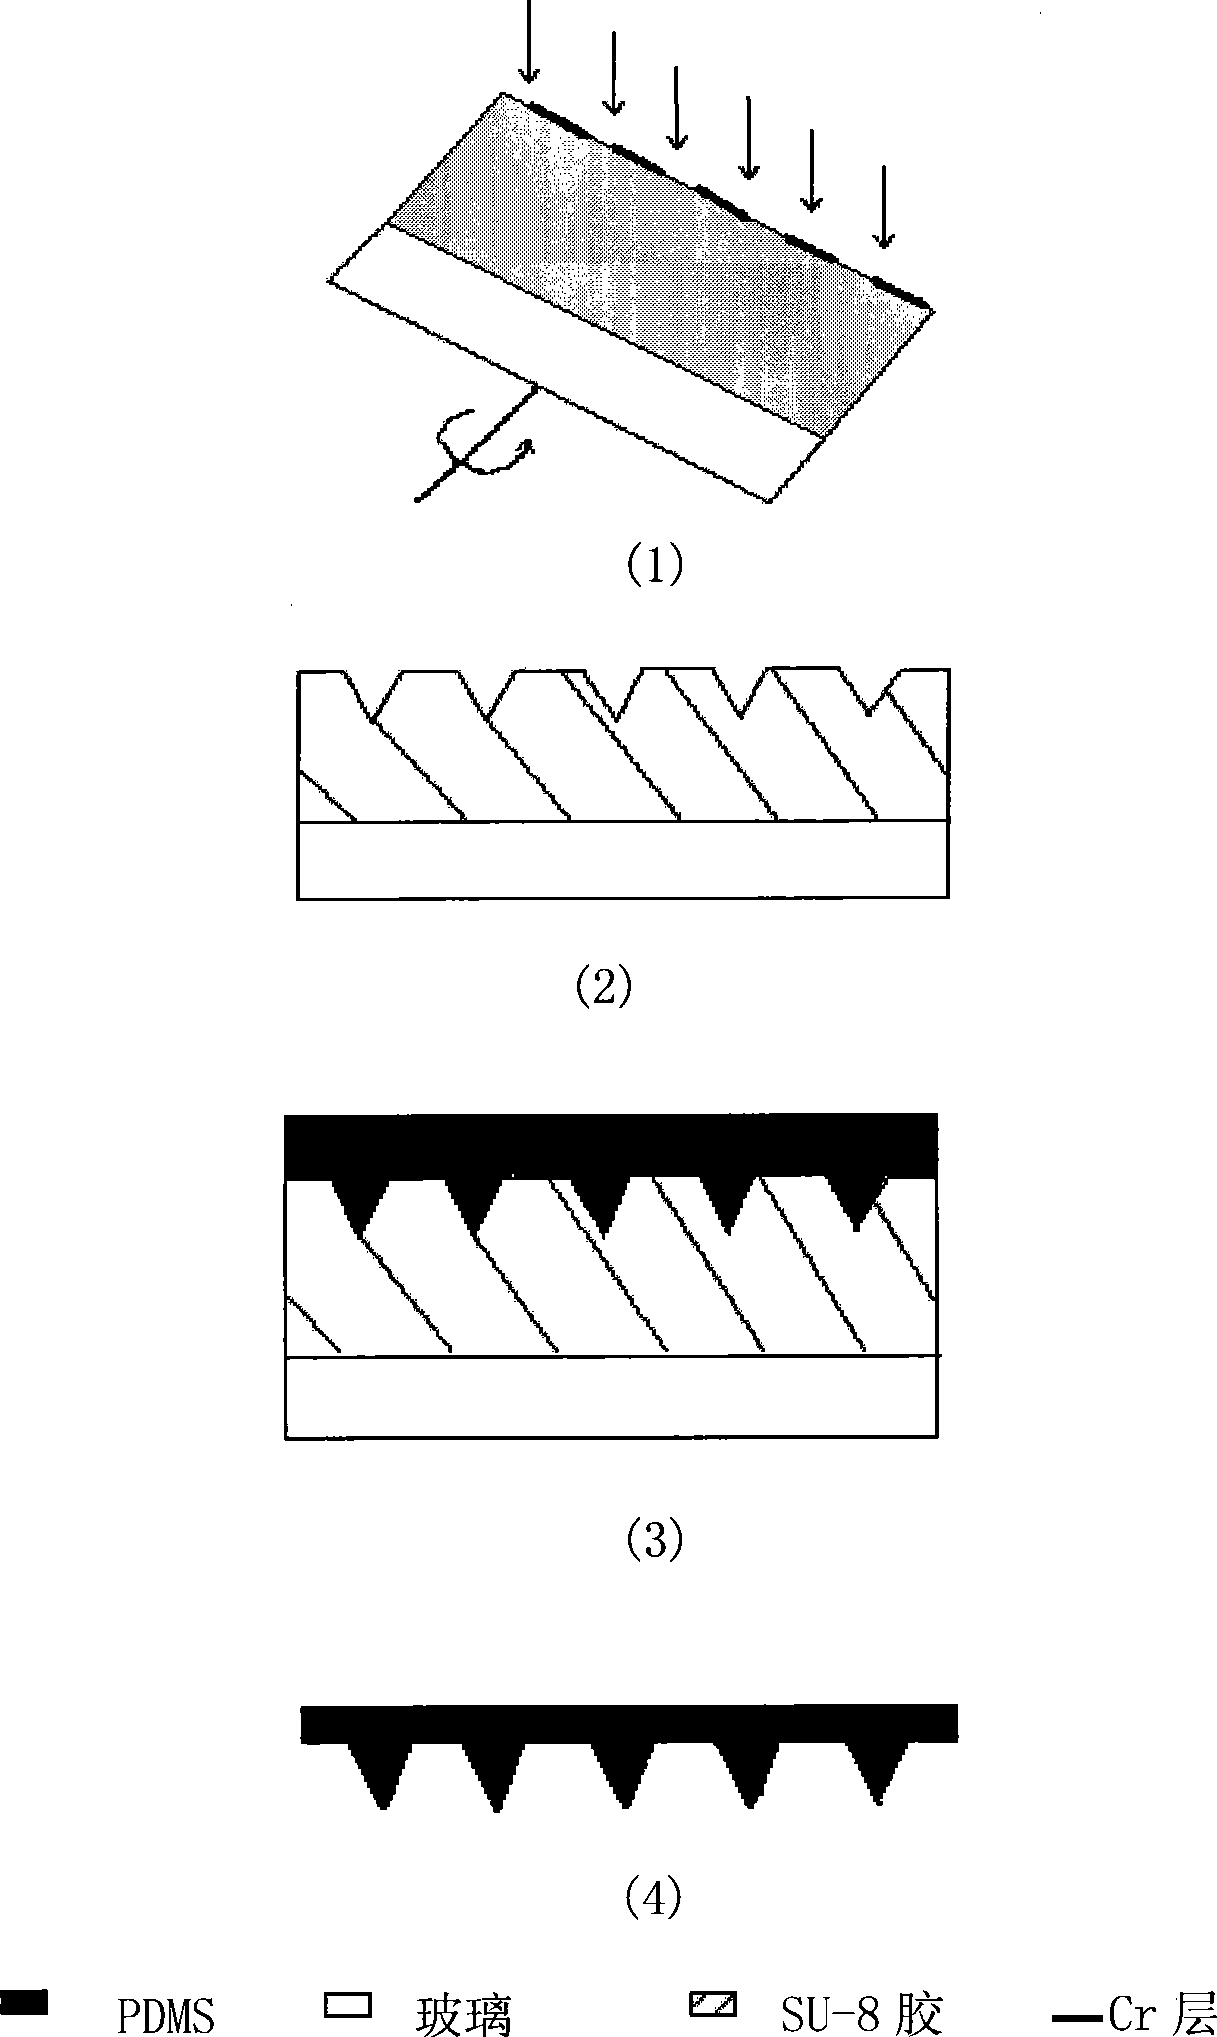 Method for preparing micro needle array by means of lithography based on tilting rotary substrate and template